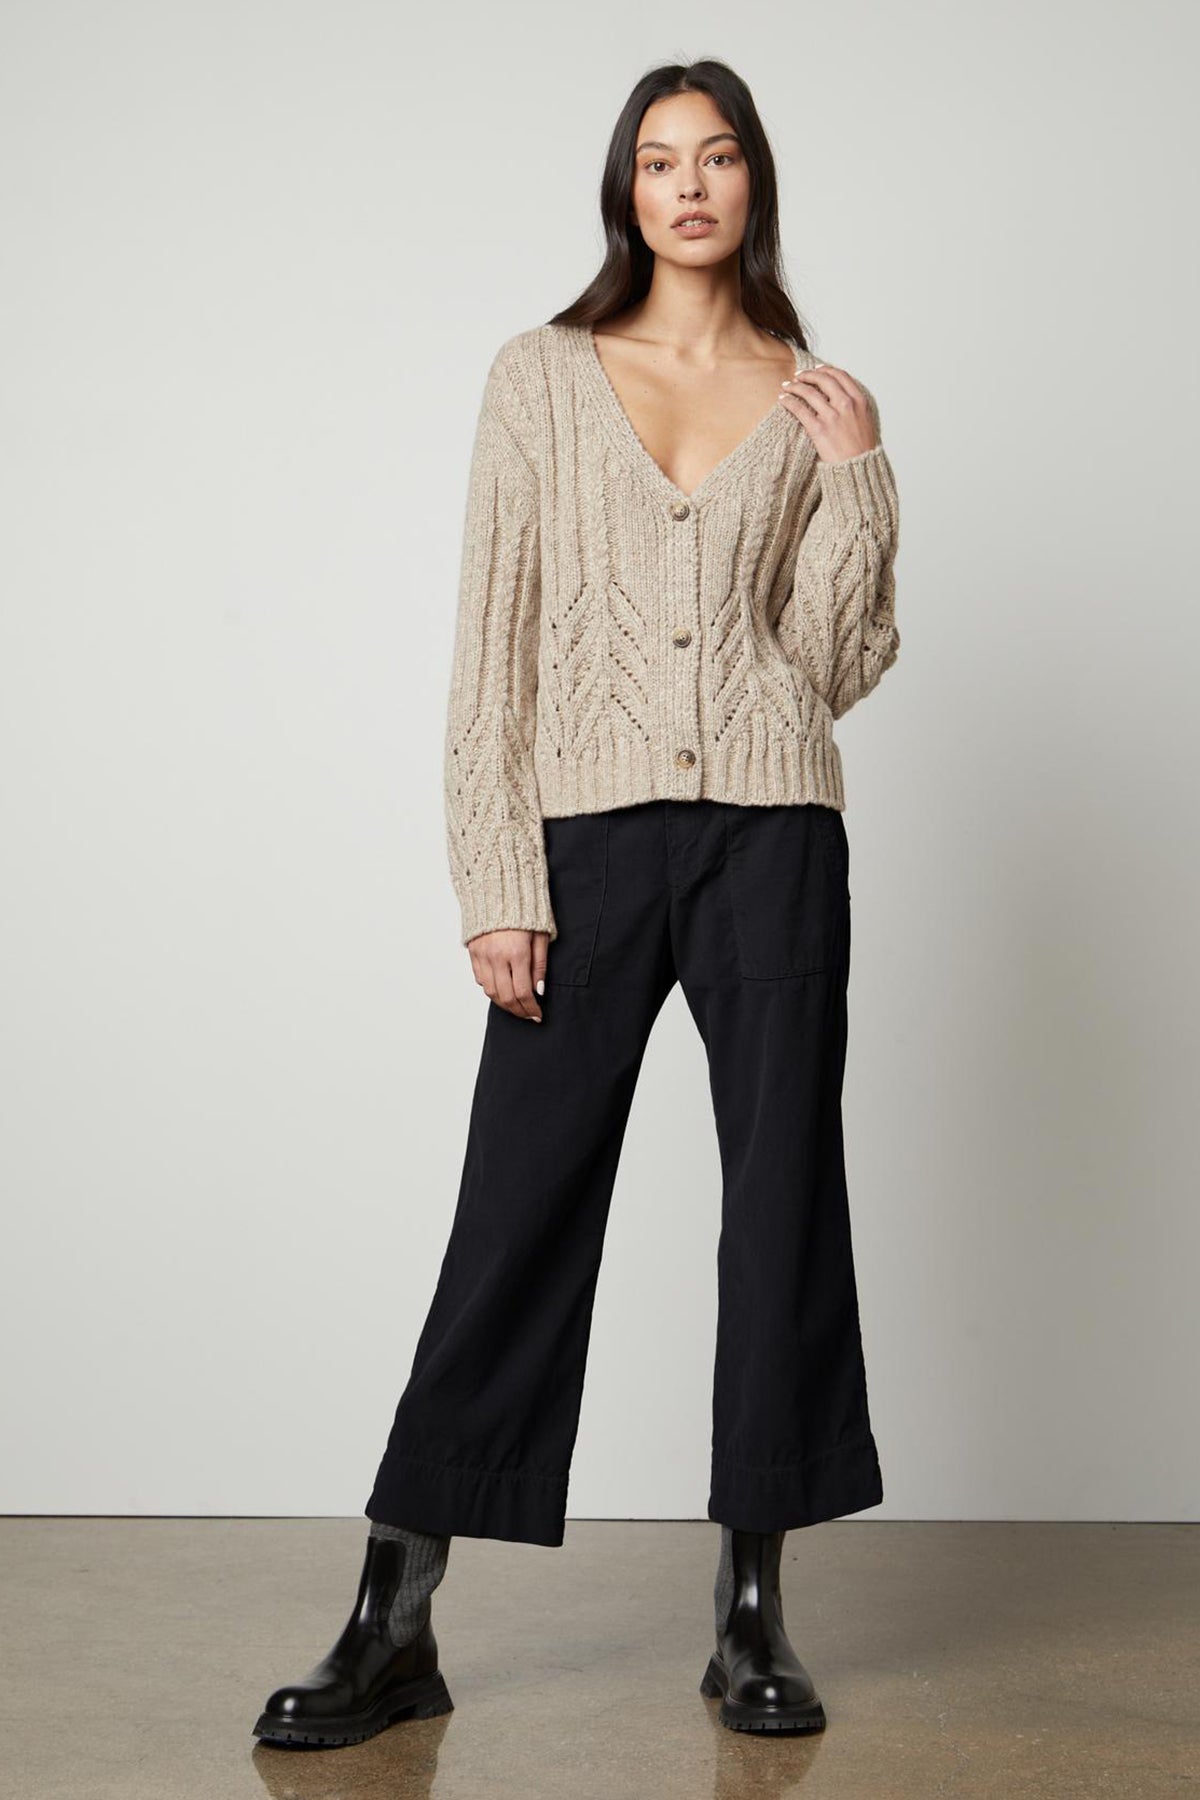 The model is wearing a beige HAZEL ALPACA CABLE KNIT CARDIGAN and black wide leg pants from Velvet by Graham & Spencer.-26897822318785